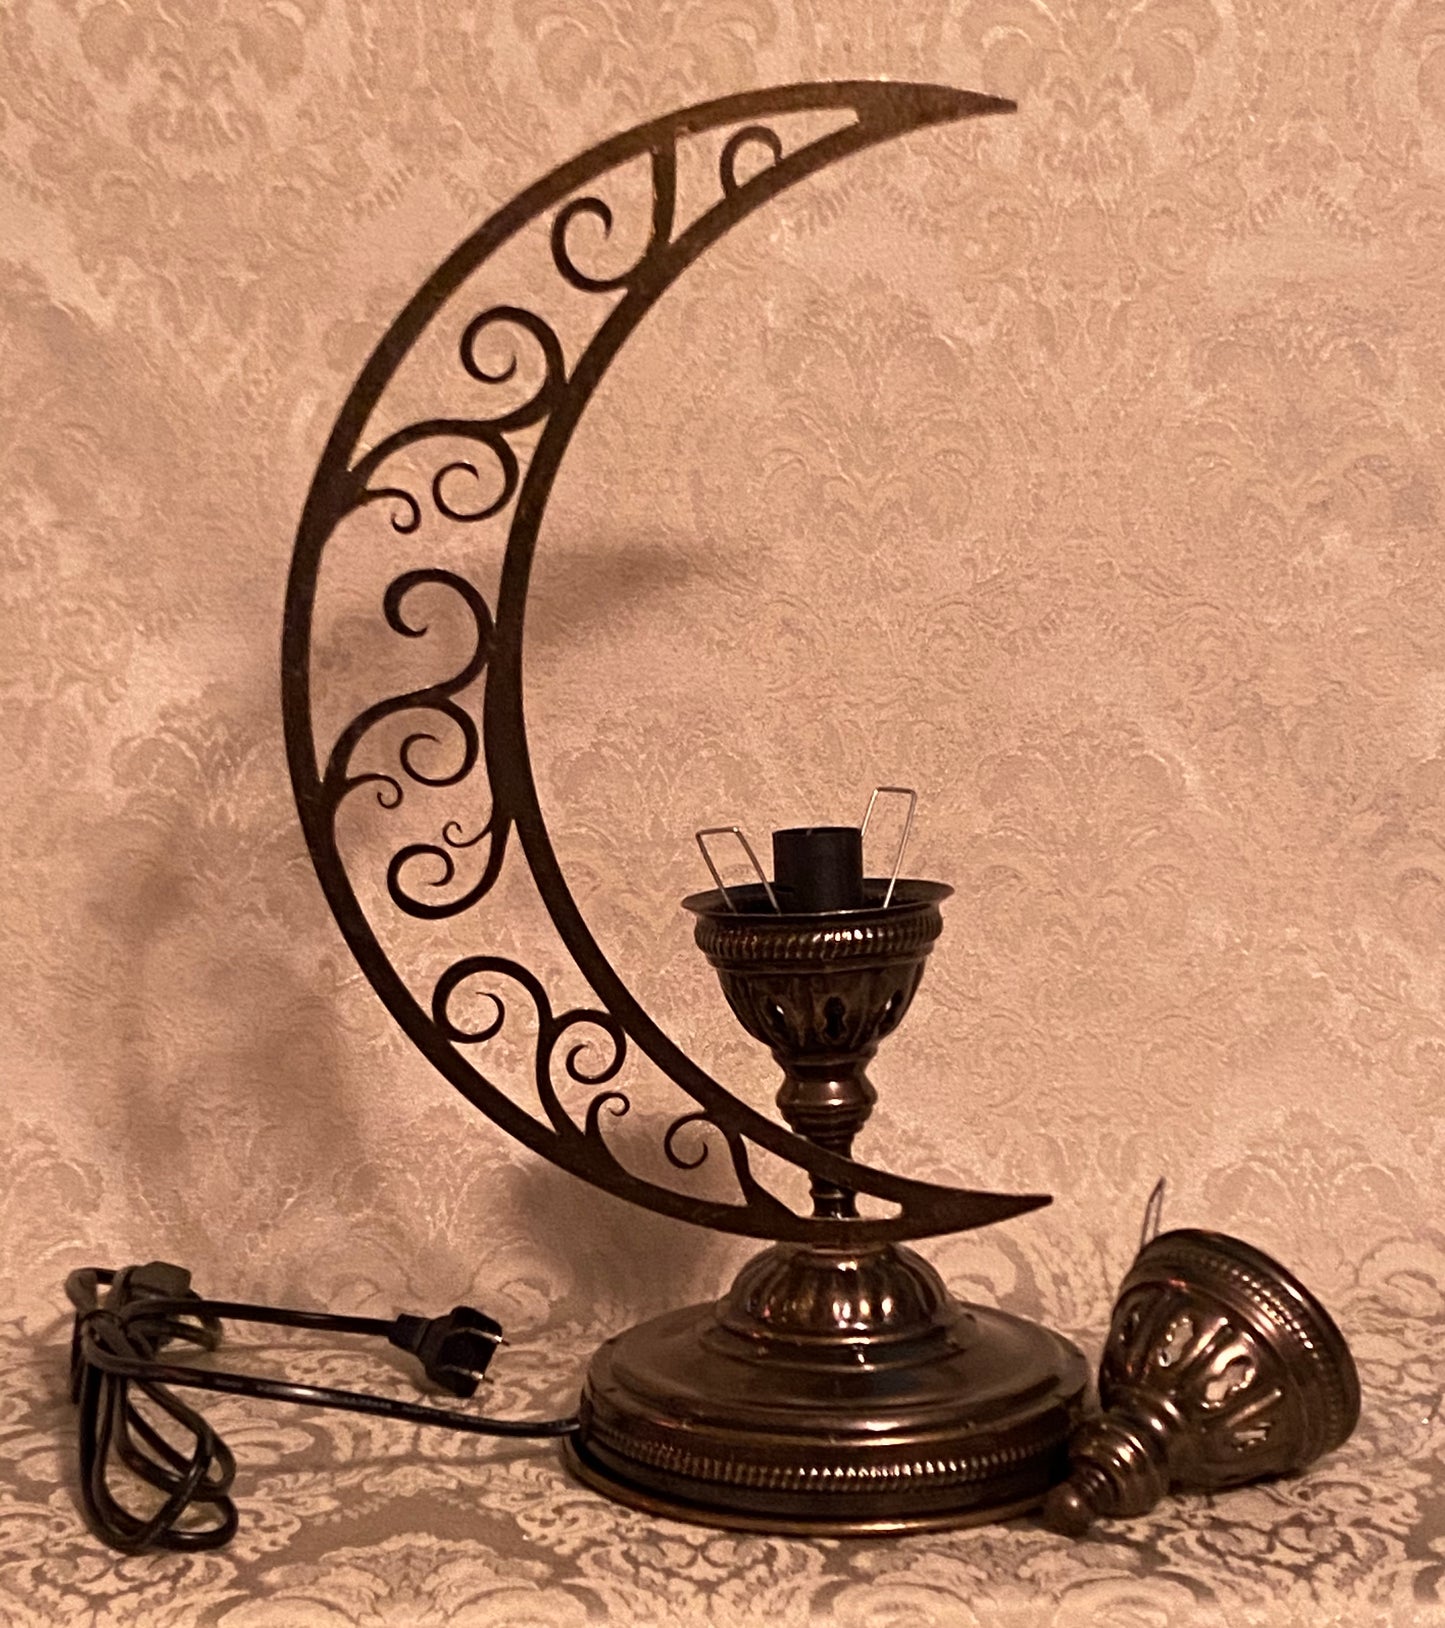 ISTANBUL CRESCENT MOON TABLE LAMP